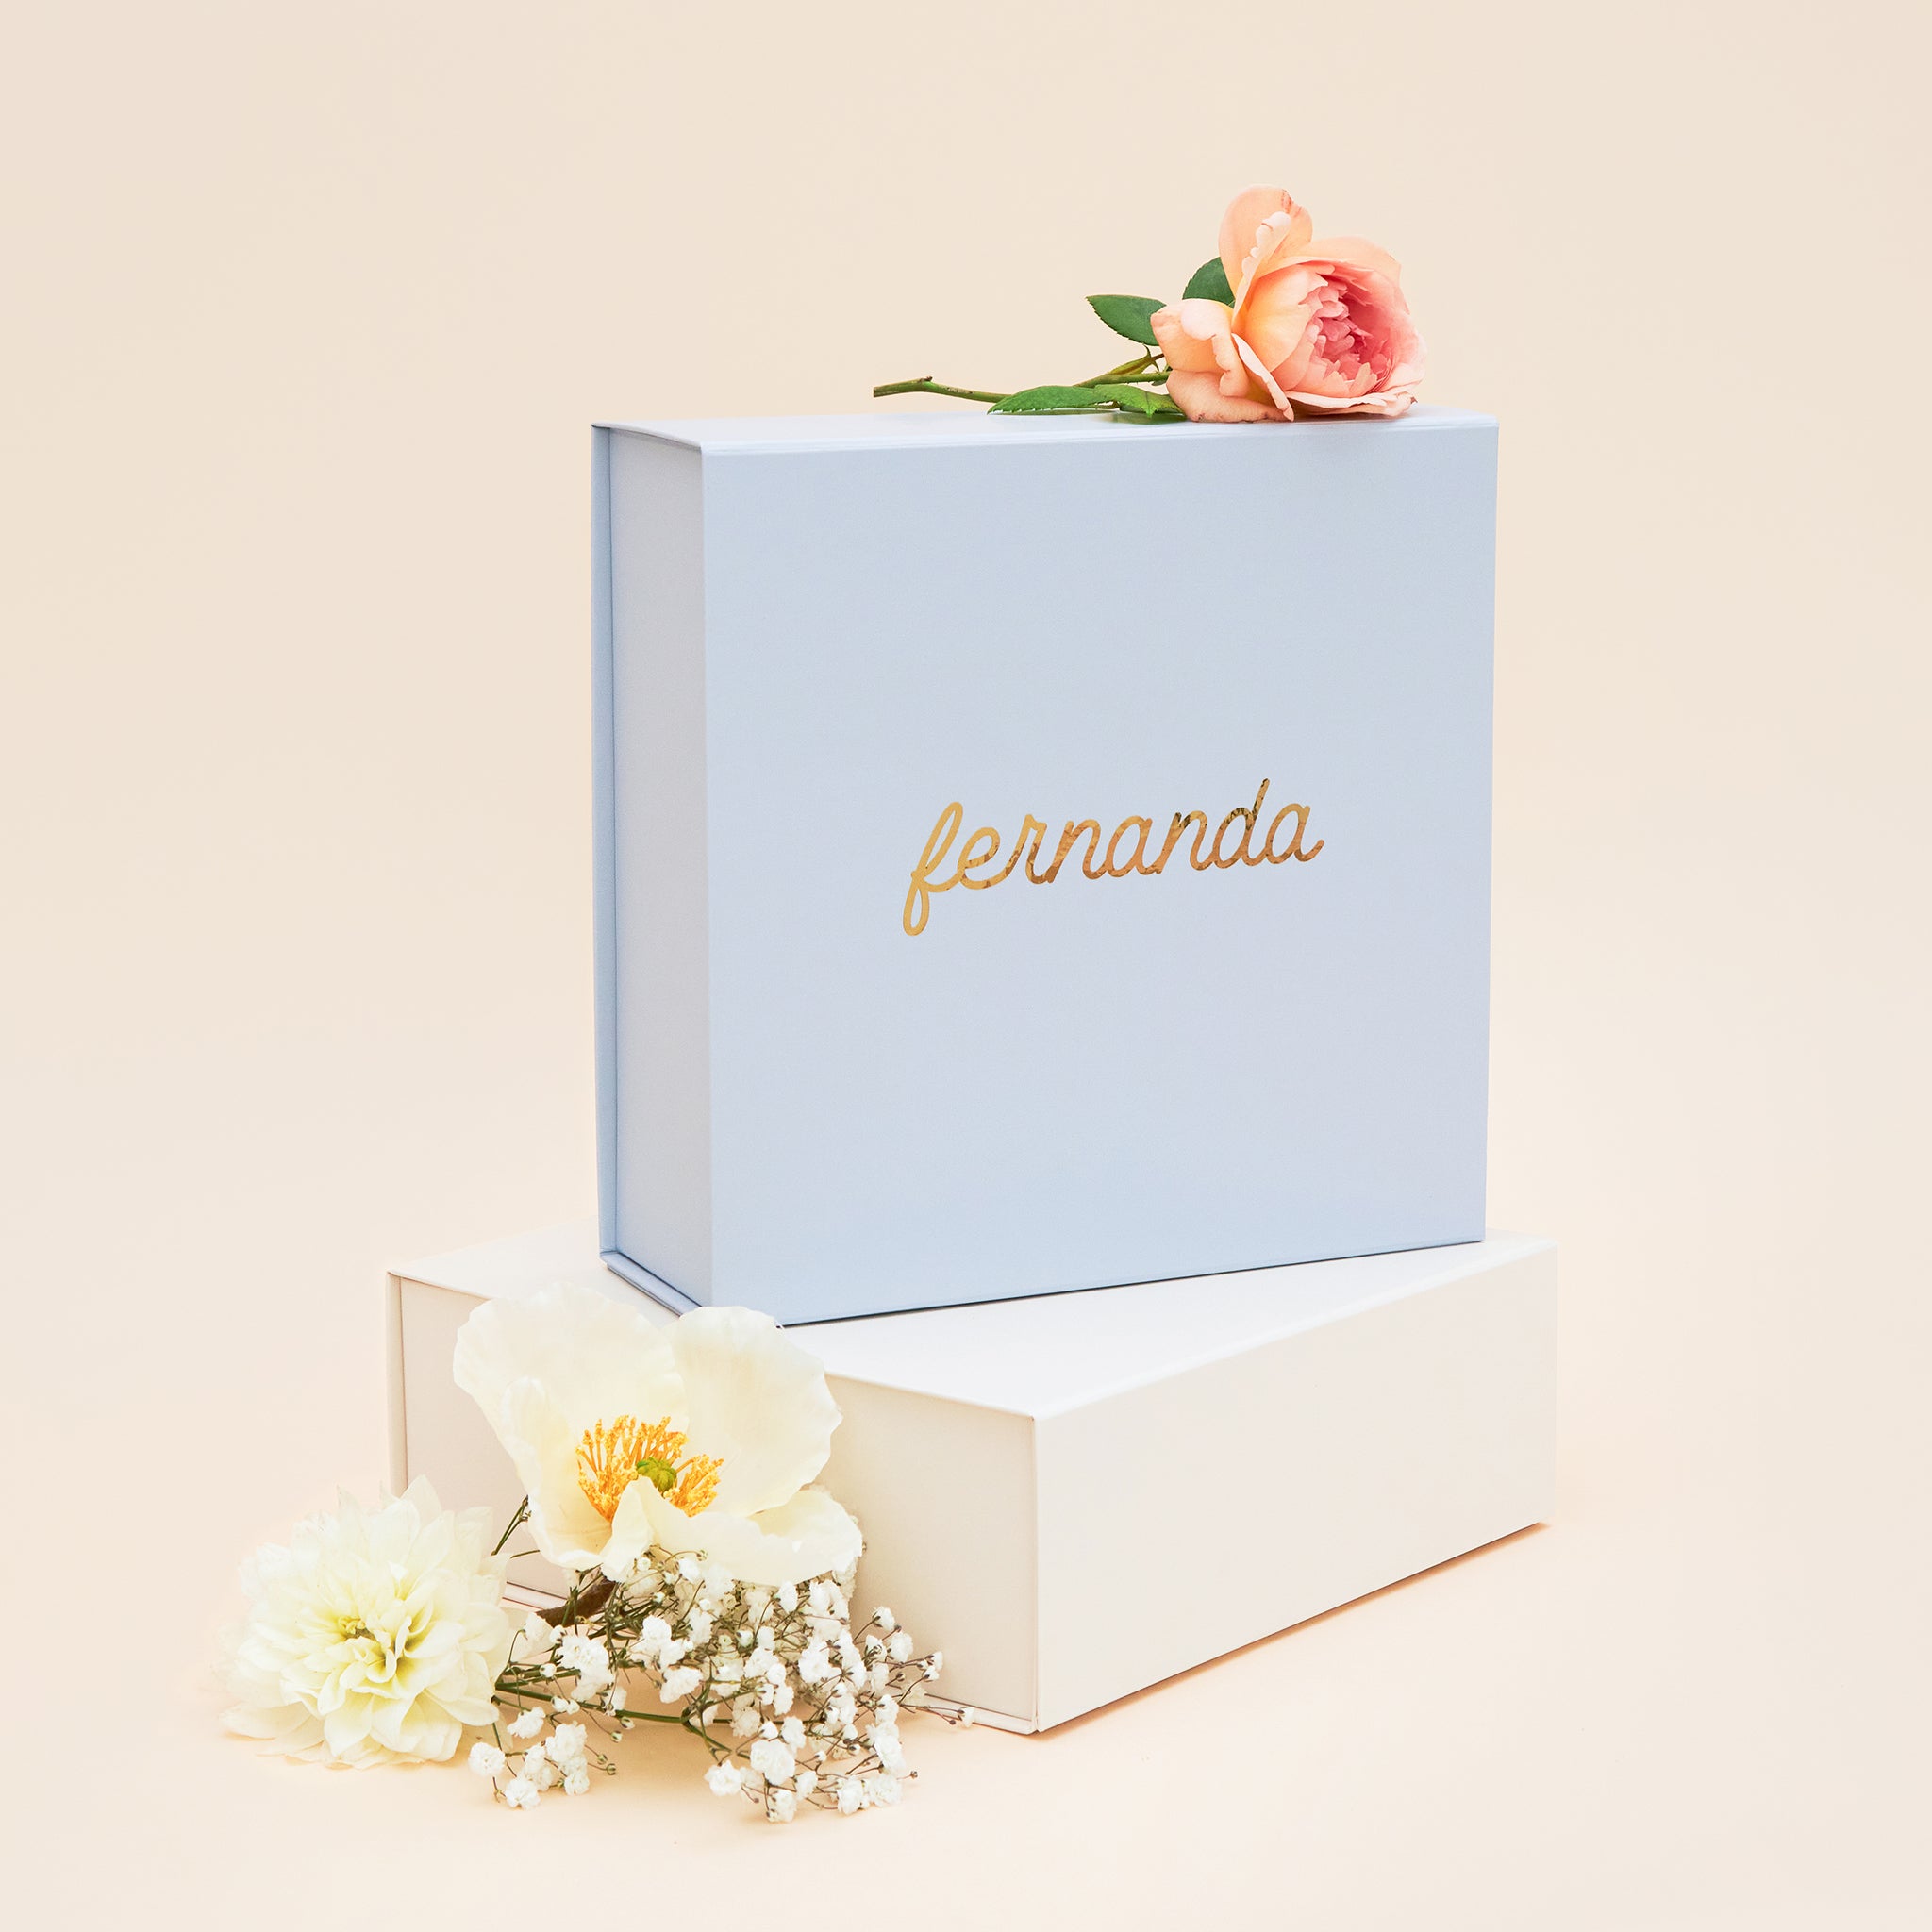 Personalized Proposal Box in Dusty Blue, front view